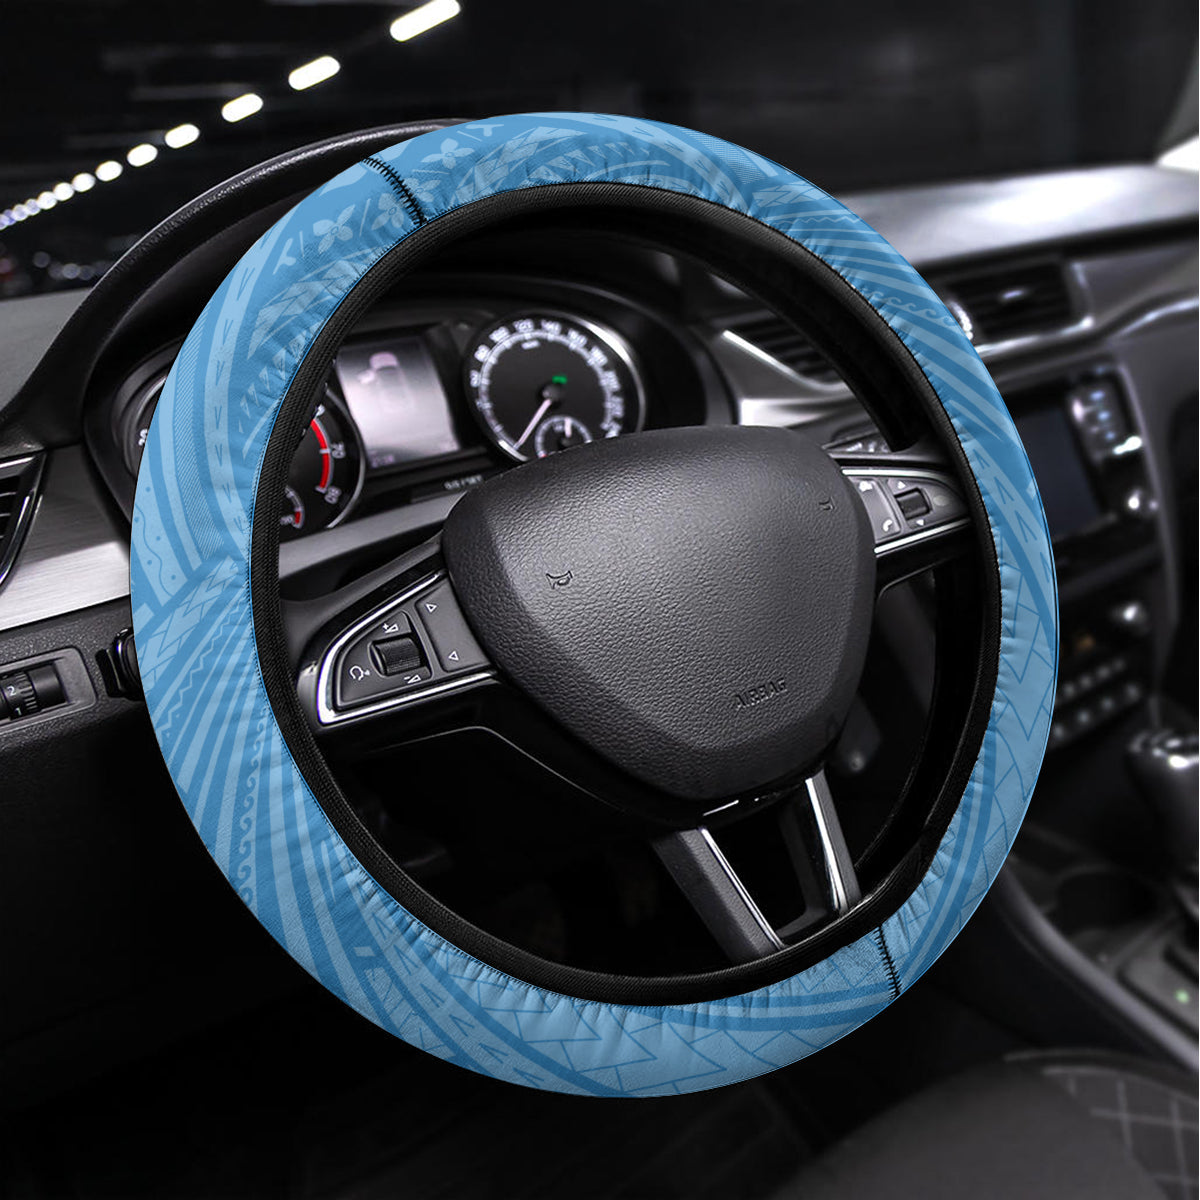 Micronesia Culture Day Steering Wheel Cover Tribal Pattern Tropical Style LT01 Universal Fit Blue - Polynesian Pride